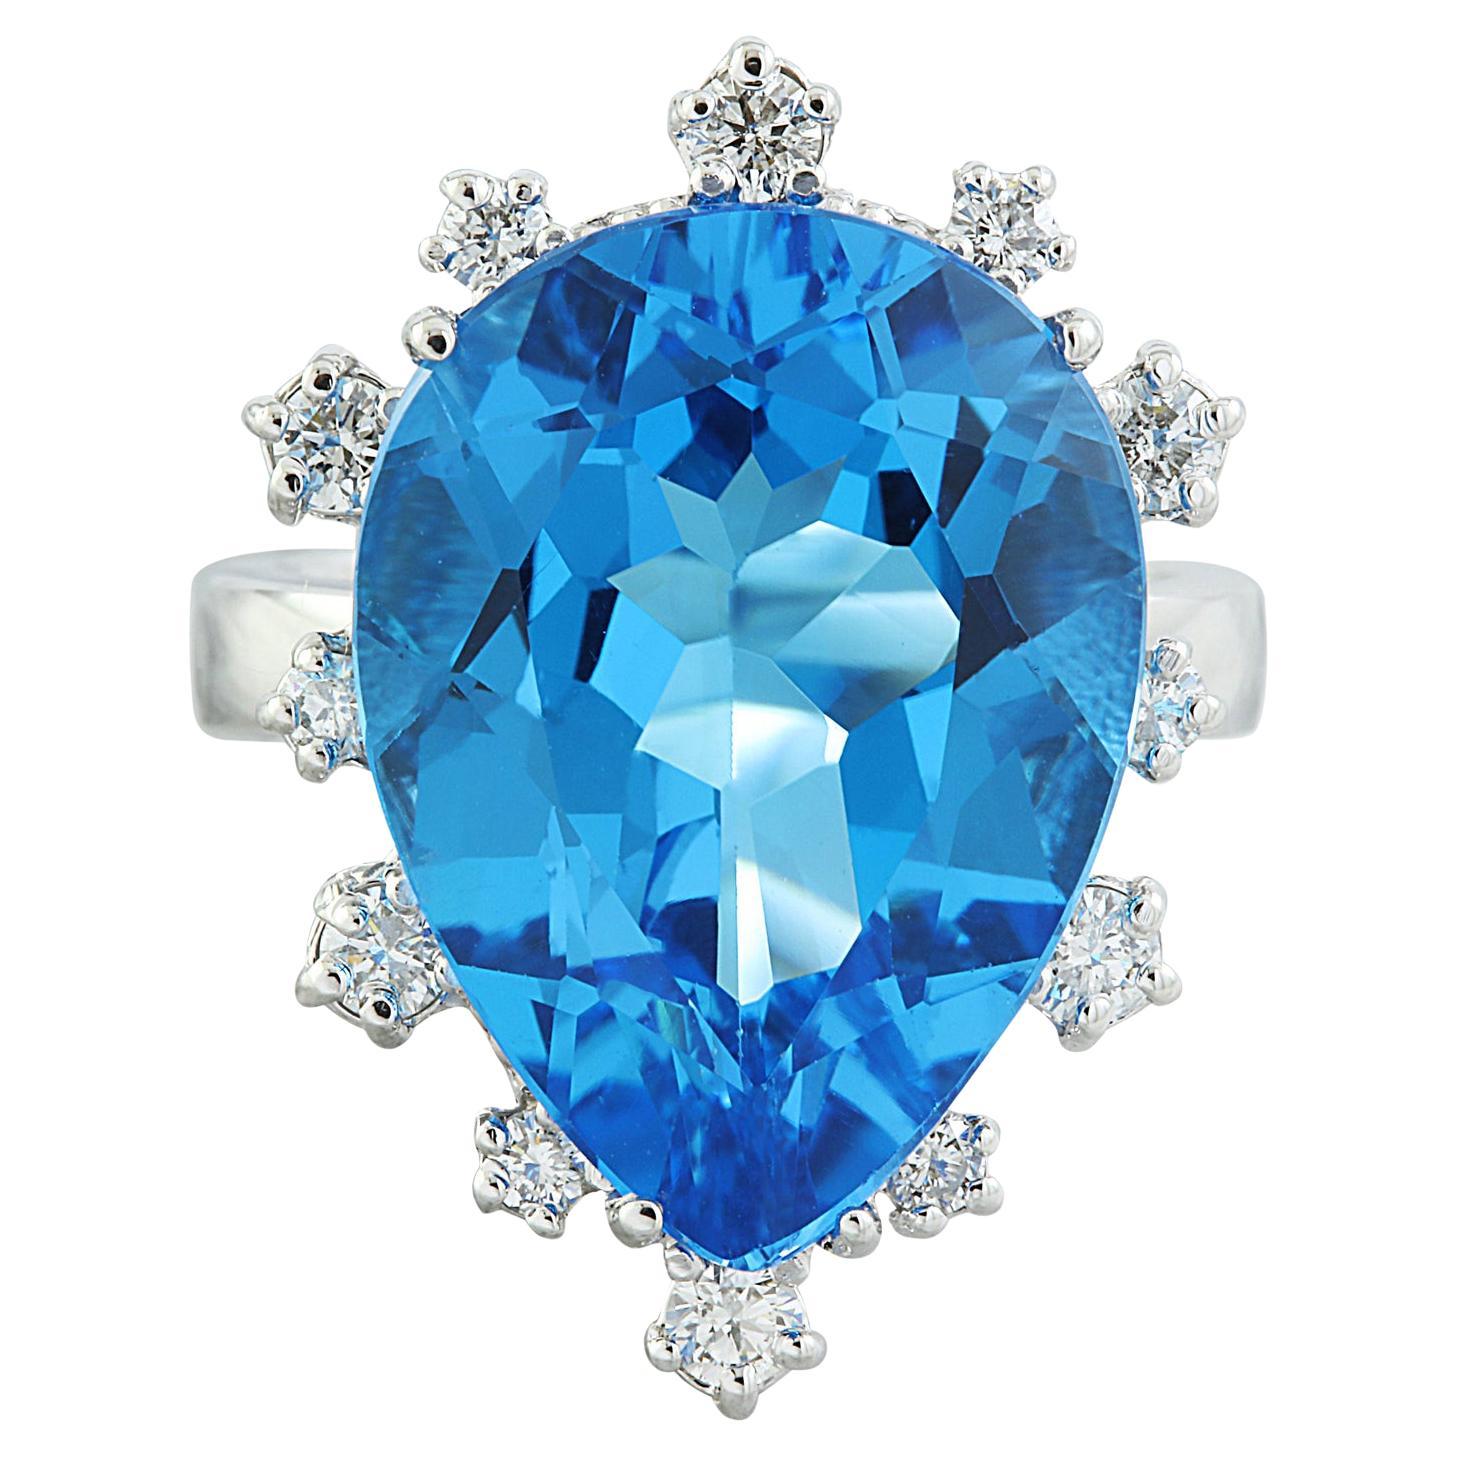 Dazzling Topaz Diamond Ring Crafted in 14K Solid White Gold